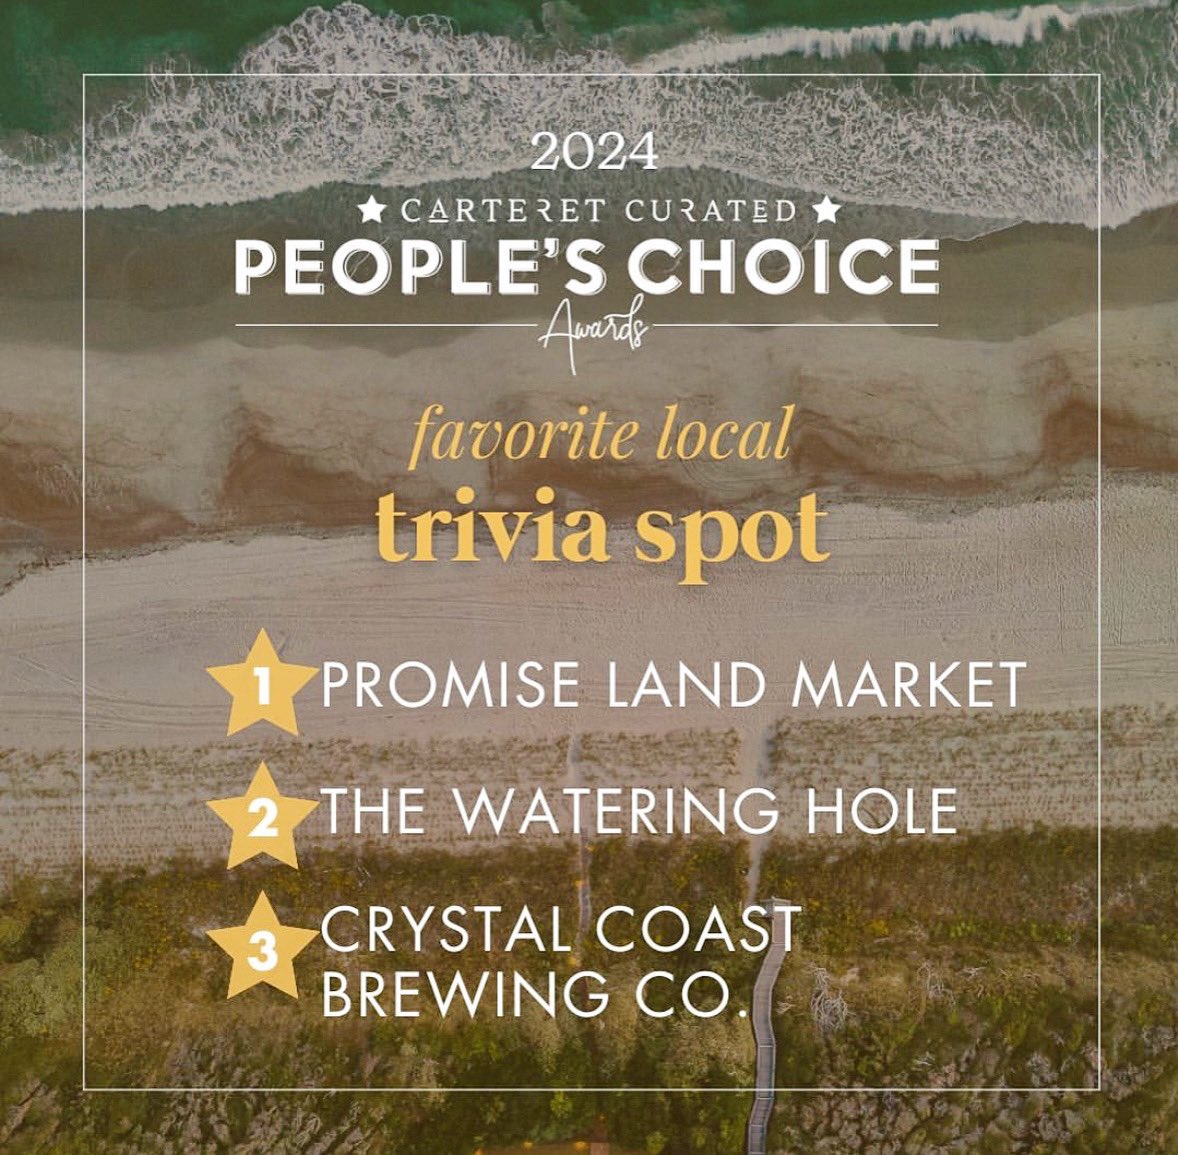 We are thrilled to have been recognized and awarded 🏆 top 3 for the 2024 Carteret Curated People’s Choice Award for Favorite Local Trivia Spot! We love our trivia and music bingo nights, and our wonderful host Dawn! We look forward to more fun times ahead!